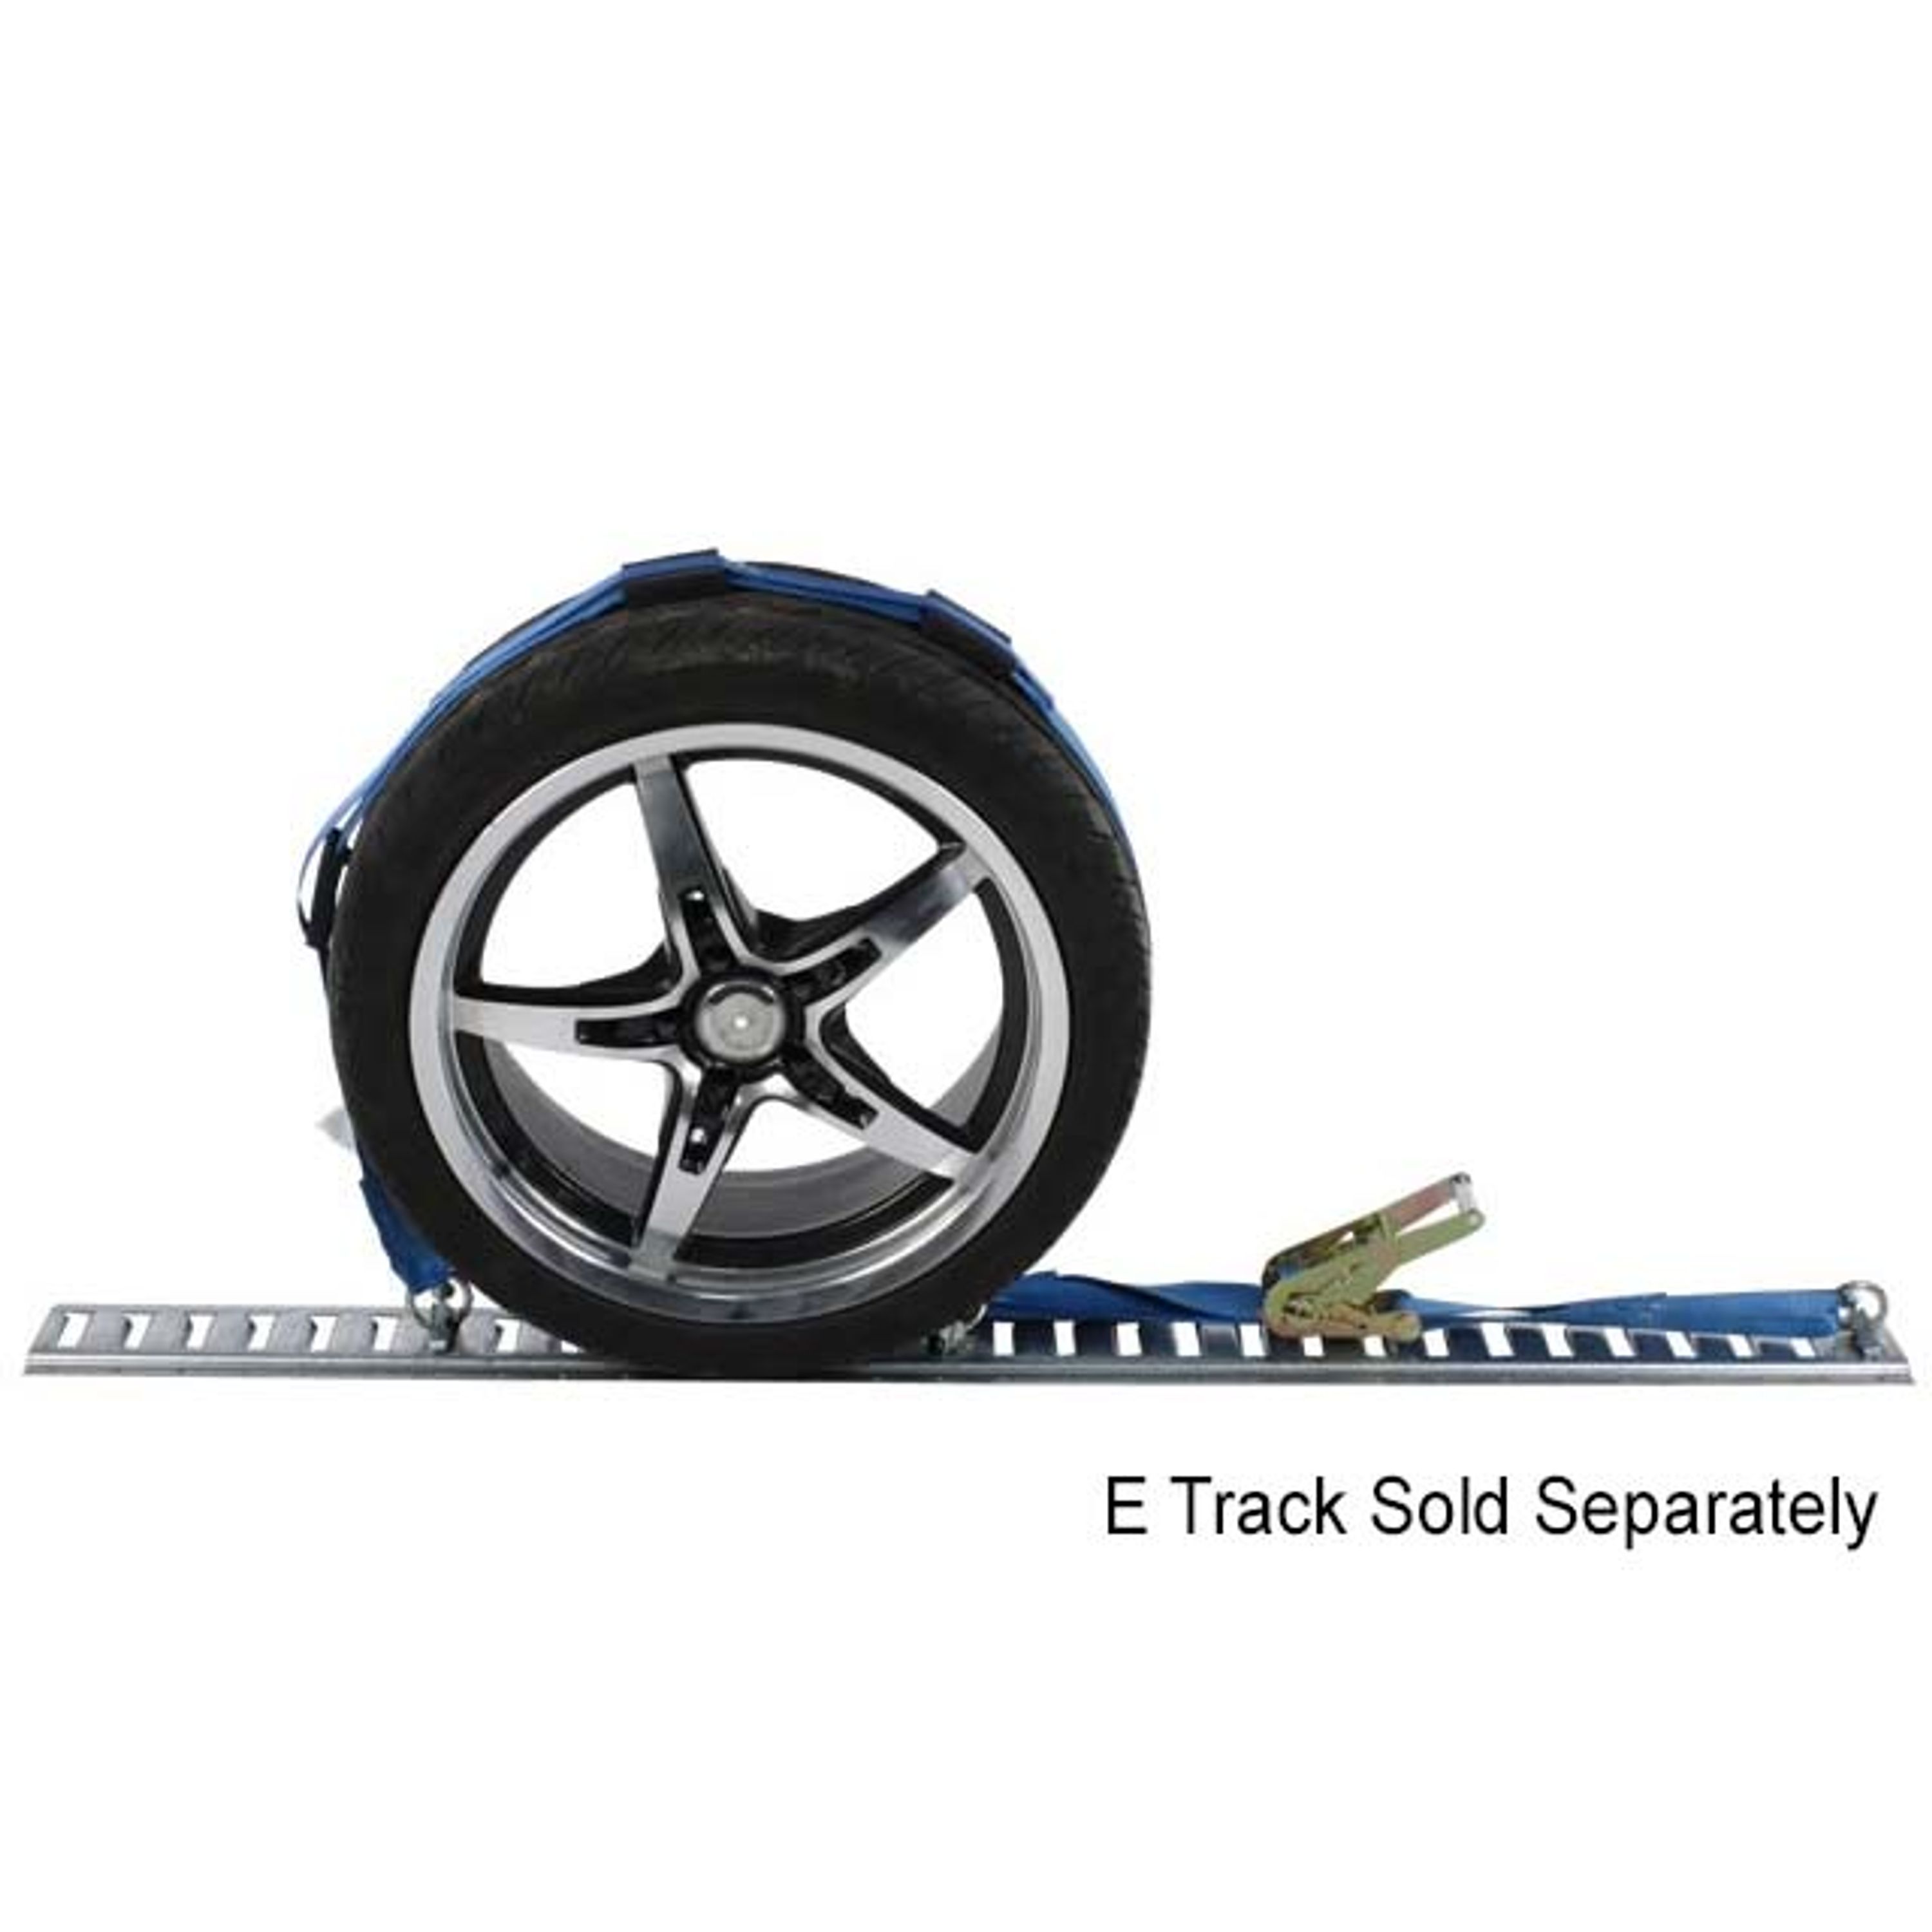 Tire Harness Mega Cargo Control 2 in x 10’ O-Ring Trailer Tie Down Lasso Strap for Wheel Lift Green, 4 - Pack - Assembled in USA Wheel Dolly 